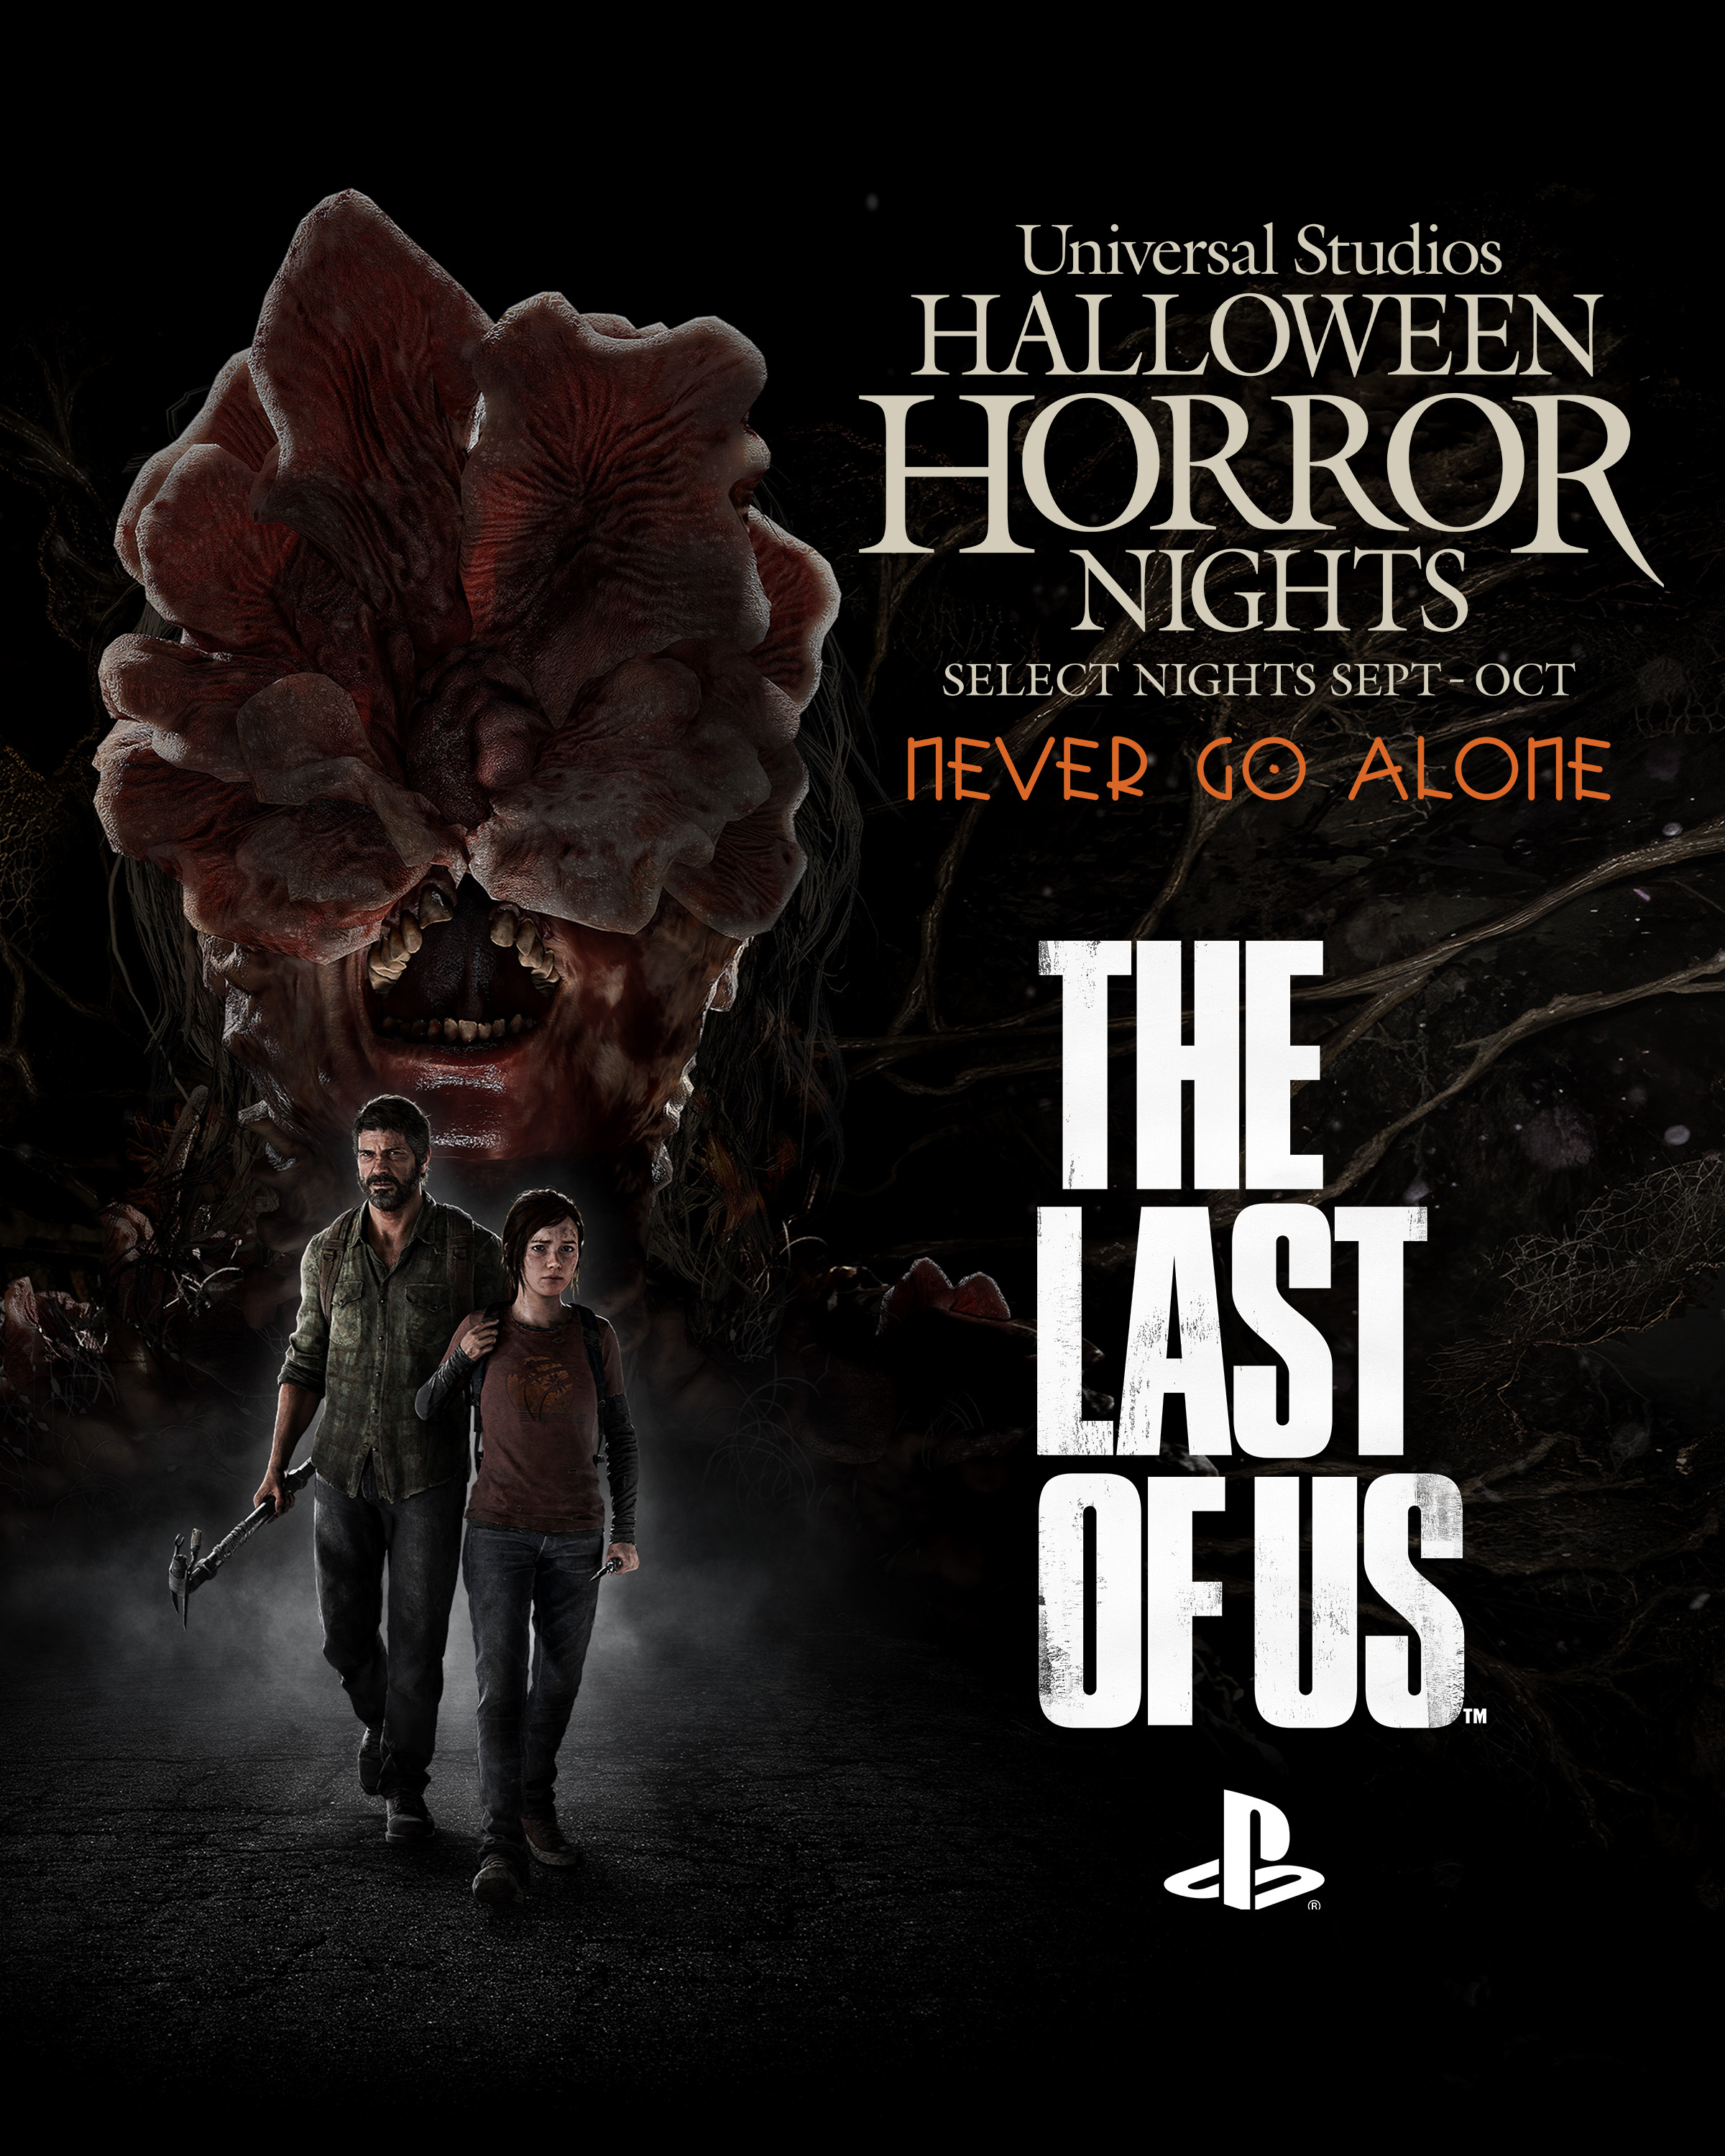 “The Last of Us,” Inspired by the Critically Acclaimed Post-Apocalyptic PlayStation Video Game, Comes to Life as an All-New Halloween Horror Nights Haunted House, Opening at Universal Orlando Resort, Beginning Friday, September 1 and Universal Studios Hollywood, Beginning Thursday, September 7